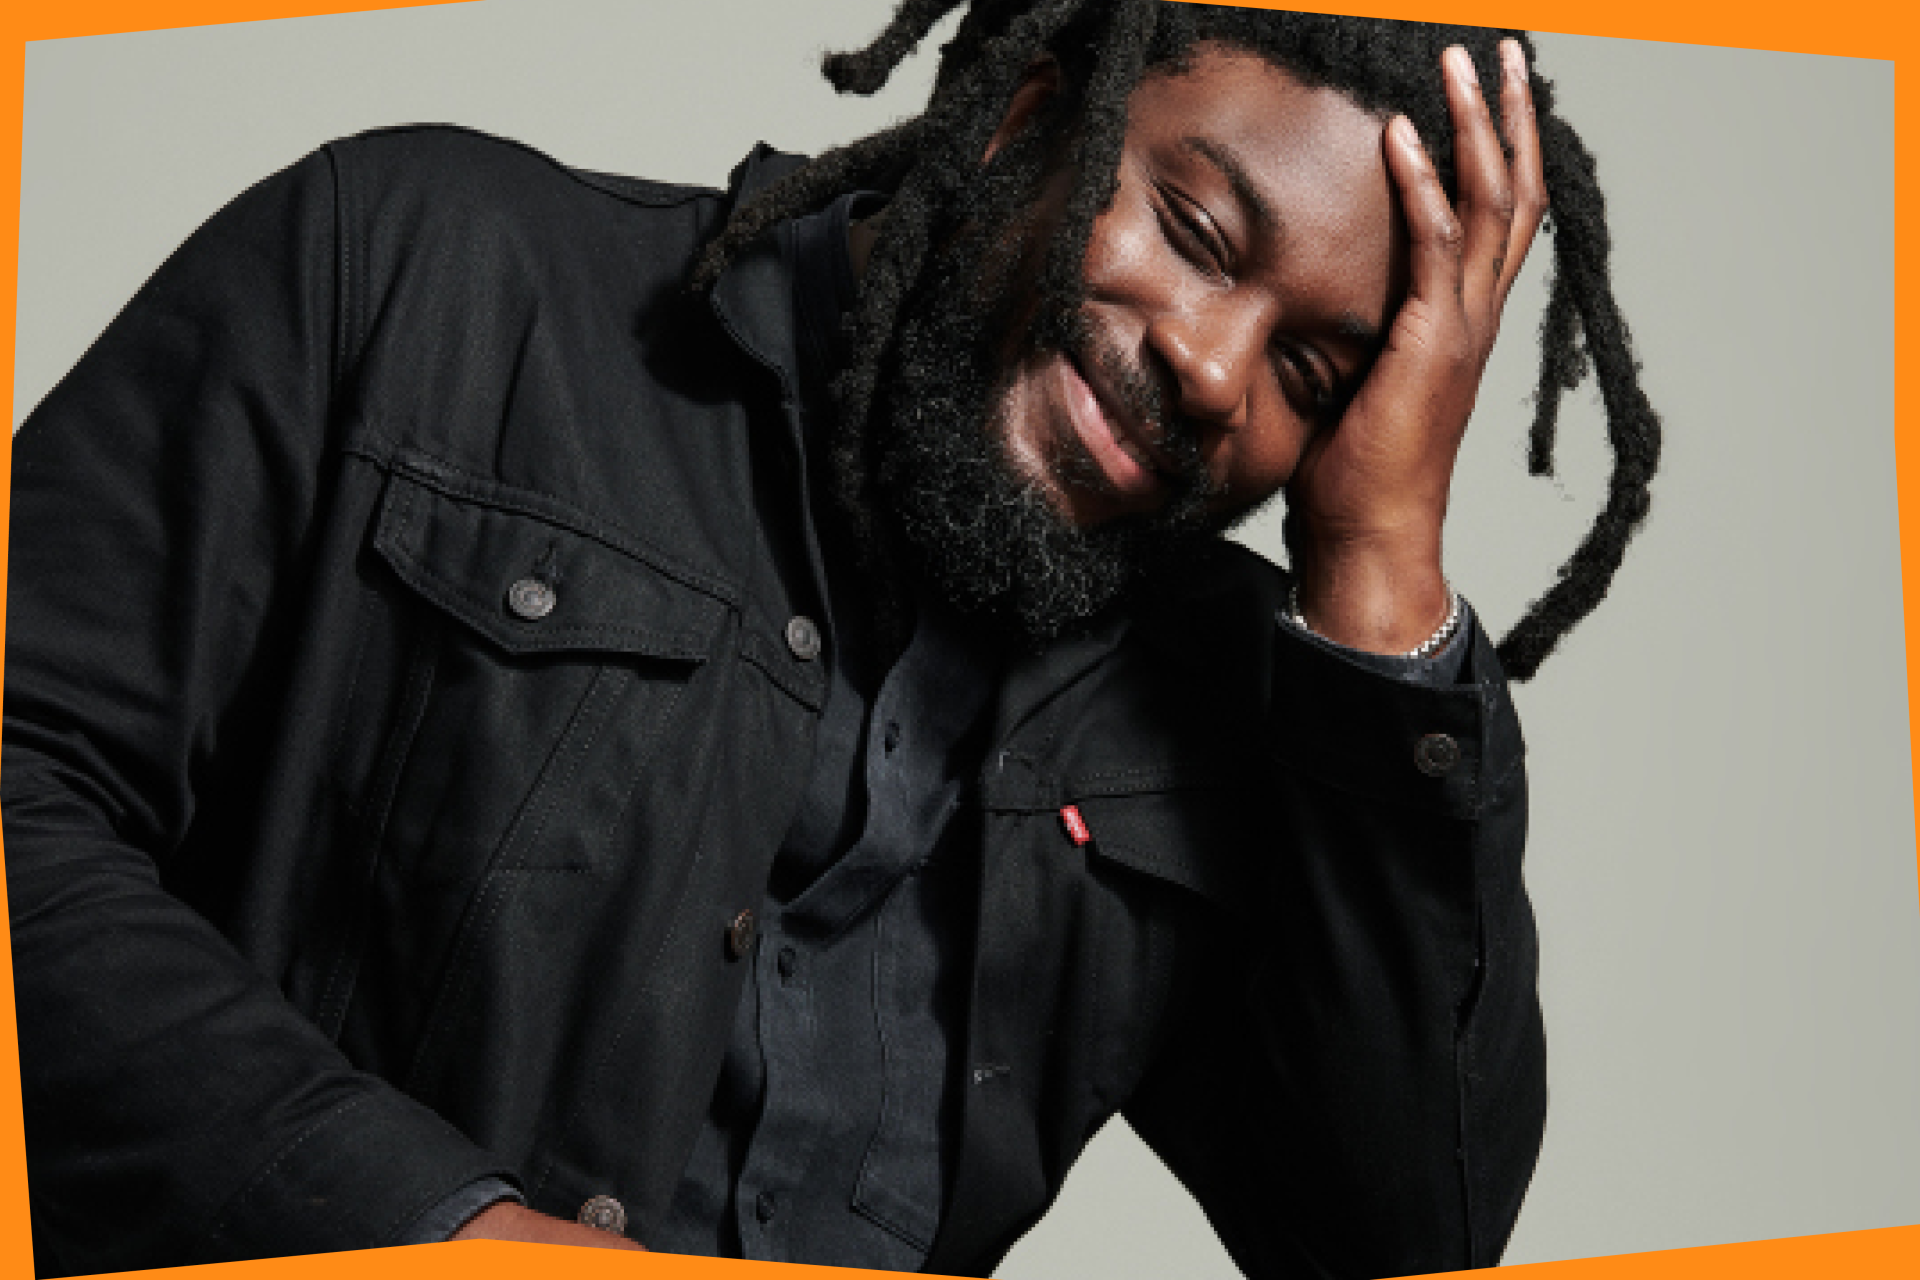 A photo of Jason Reynolds shows him wearing all black and smiling brightly towards the camera while resting his head in his left hand.